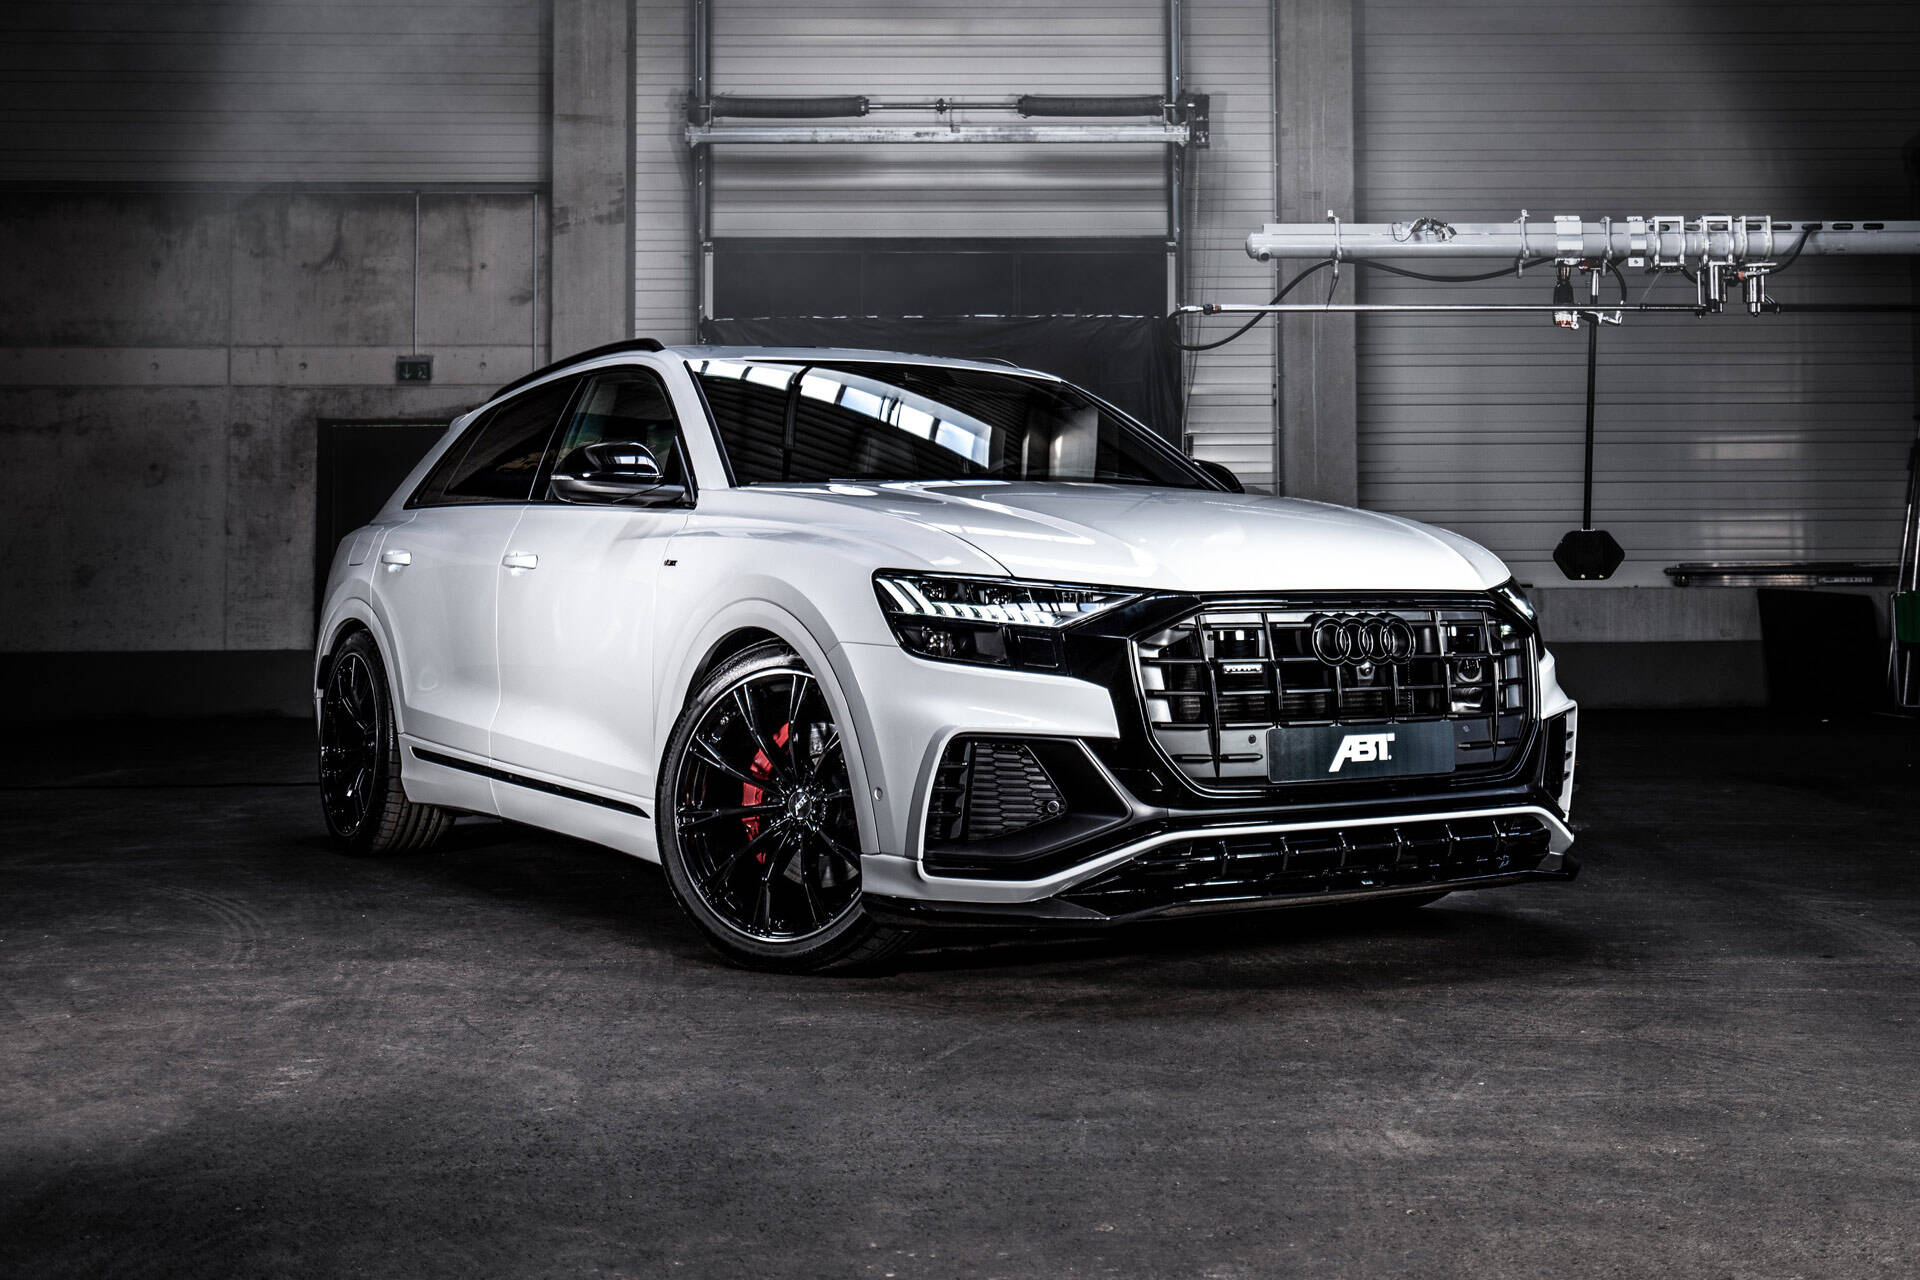 ABT presents aerodynamic upgrades for the 2019 Audi Q8 - Audi Tuning, VW  Tuning, Chiptuning von ABT Sportsline.